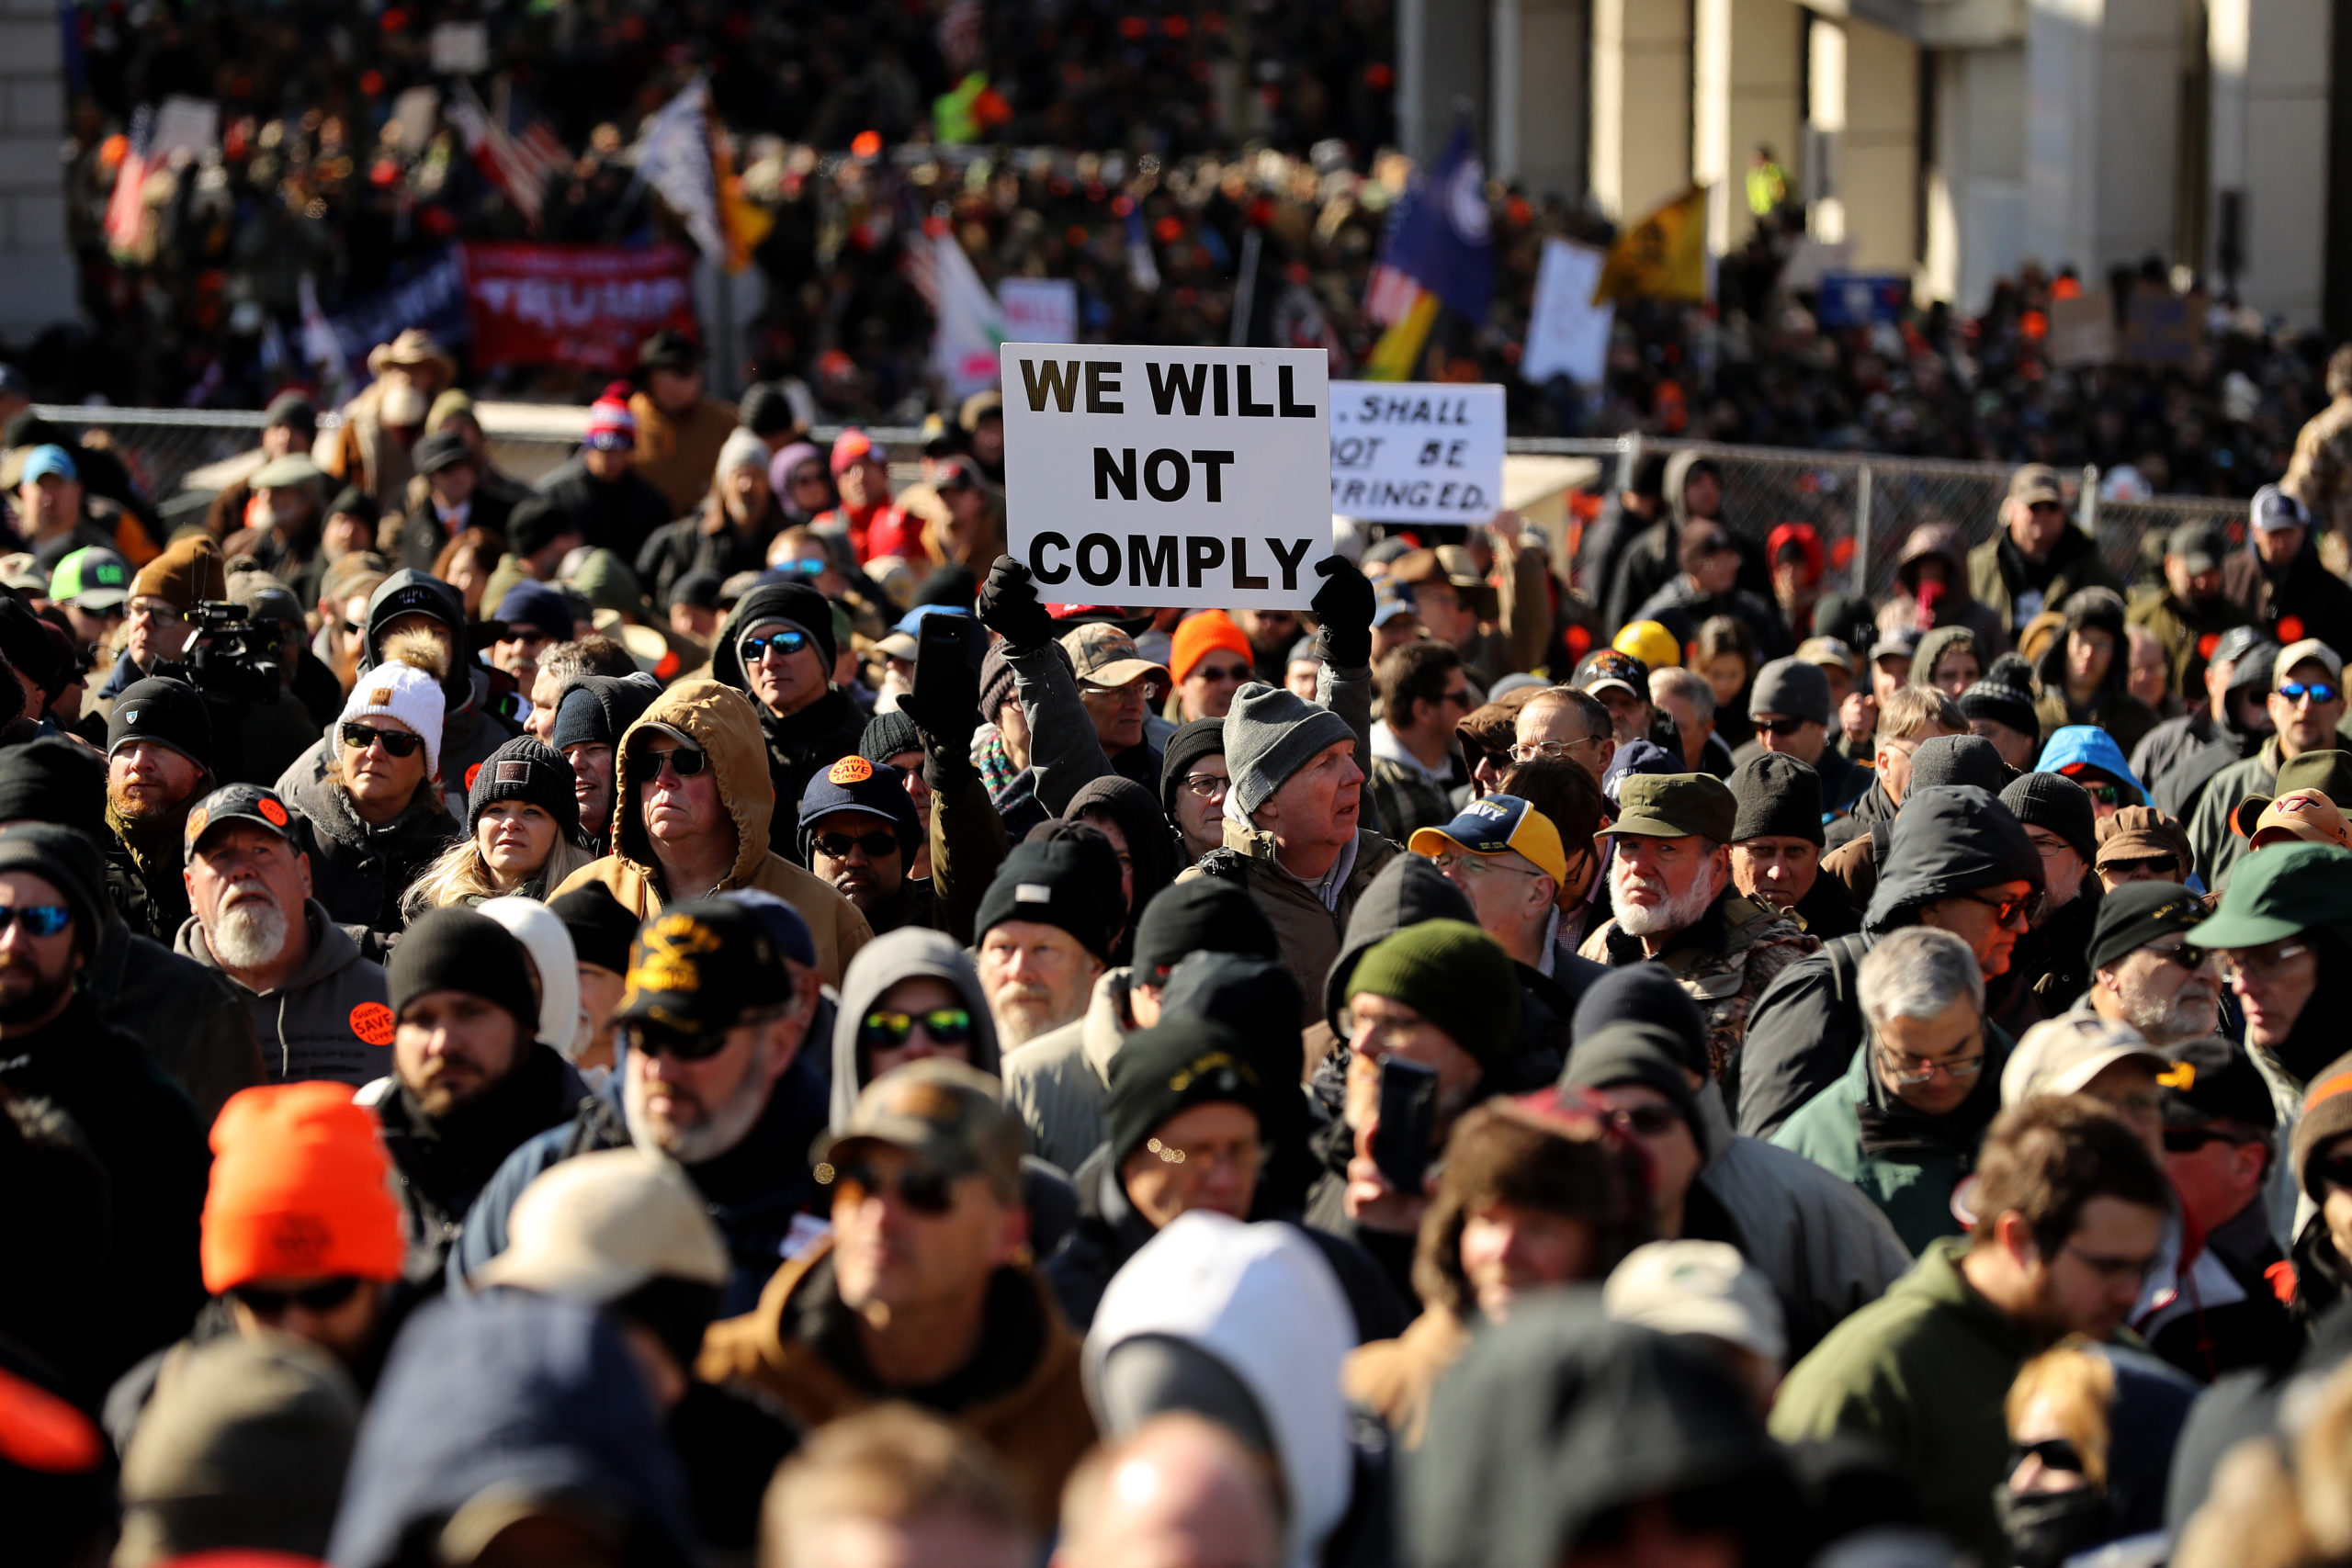 RICHMOND, VIRGINIA - JANUARY 20: Thousands of gun rights advocates attend a rally organized by The Virginia Citizens Defense League on Capitol Square near the state capital building January 20, 2020 in Richmond, Virginia. During elections last year, Virginia Governor Ralph Northam promised to enact sweeping gun control laws in 2020, including limiting handgun purchase to one per month, banning military-style weapons and silencers, allowing localities to ban guns in public spaces and enacting a 'red flag' law so authorities can temporarily seize weapons from someone deemed a threat. While event organizers have asked supporters to show up un-armed, militias and other extremist groups from across the country plan to attend the rally and show their support for gun rights. (Chip Somodevilla/Getty Images)